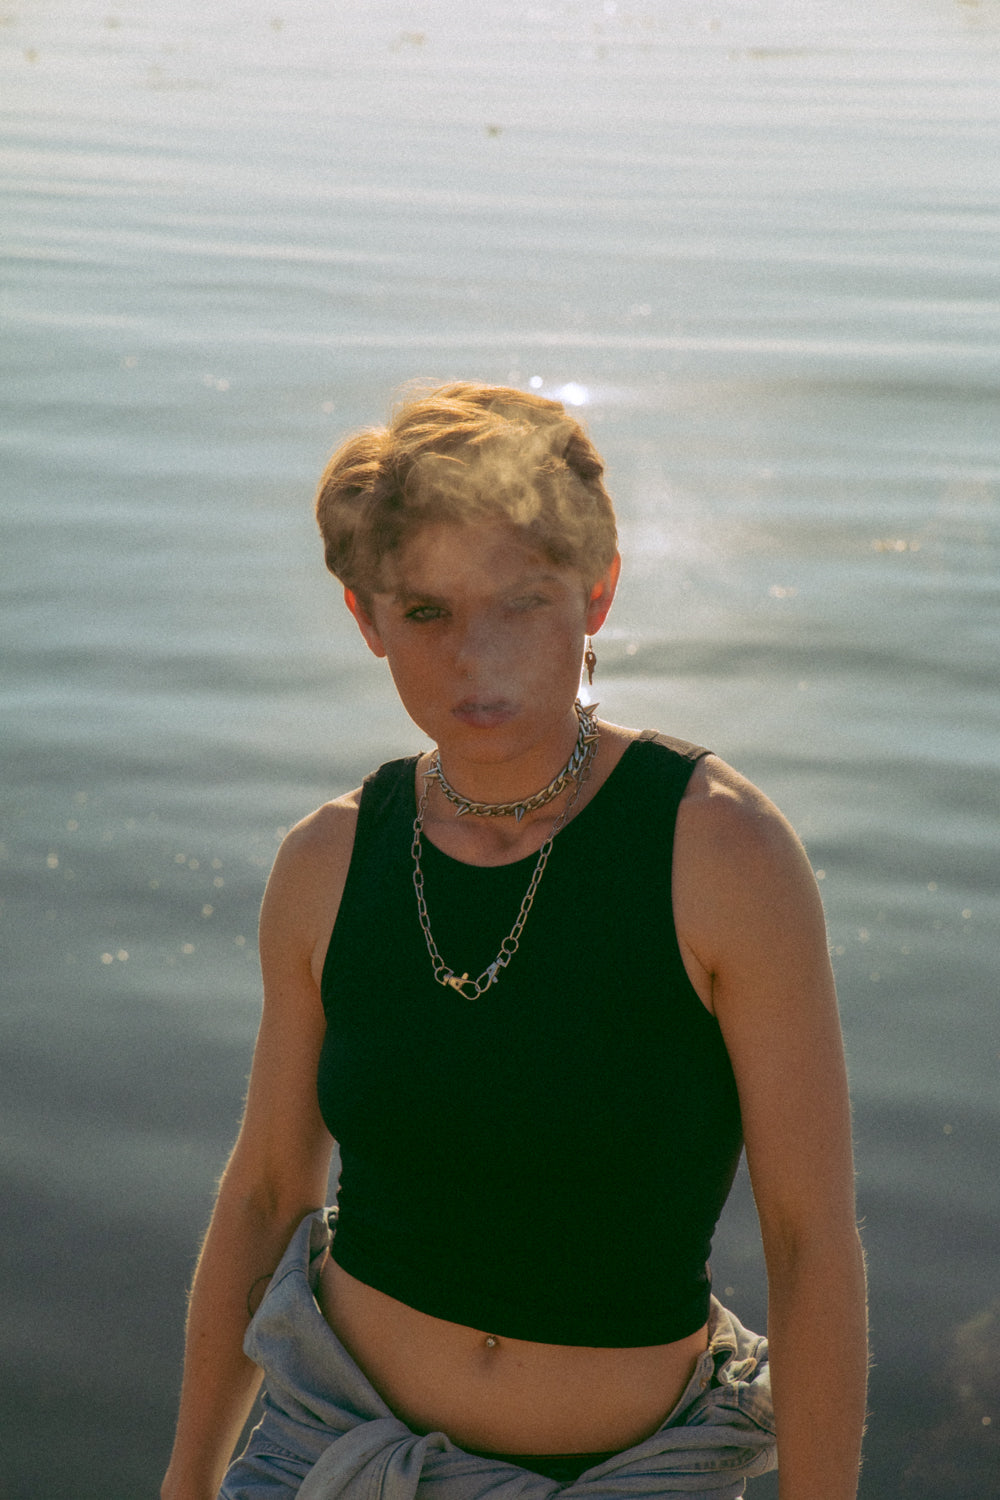 Non binary model exhaling smoke. The smoke is partly covering their face while they stare at the camera. They are wearing a black tank top, one key-shaped earring and two chain necklaces (one with spikes). The ocean is behind them.